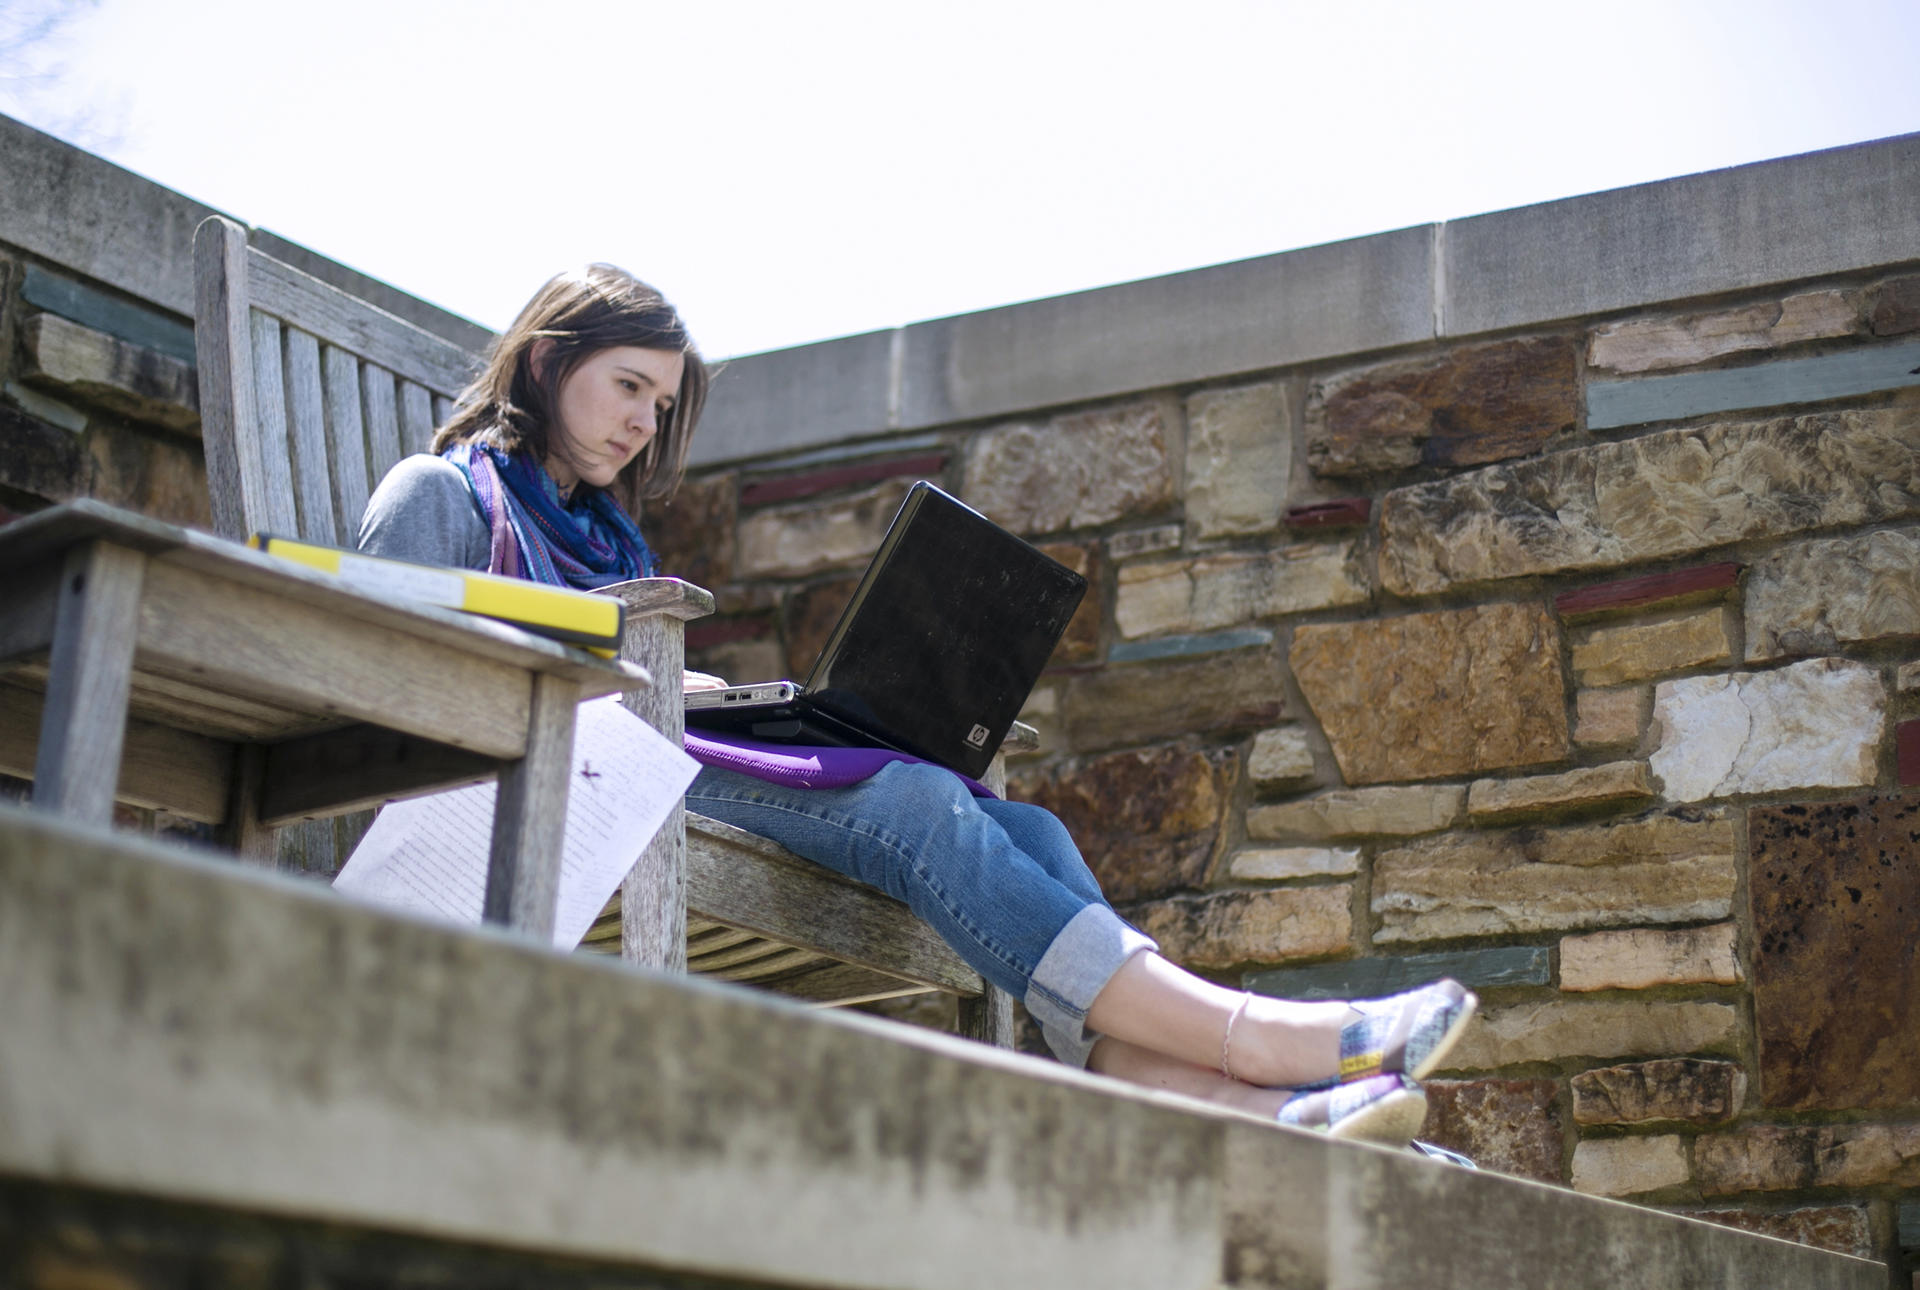 A student sitting on a bench with a laptop